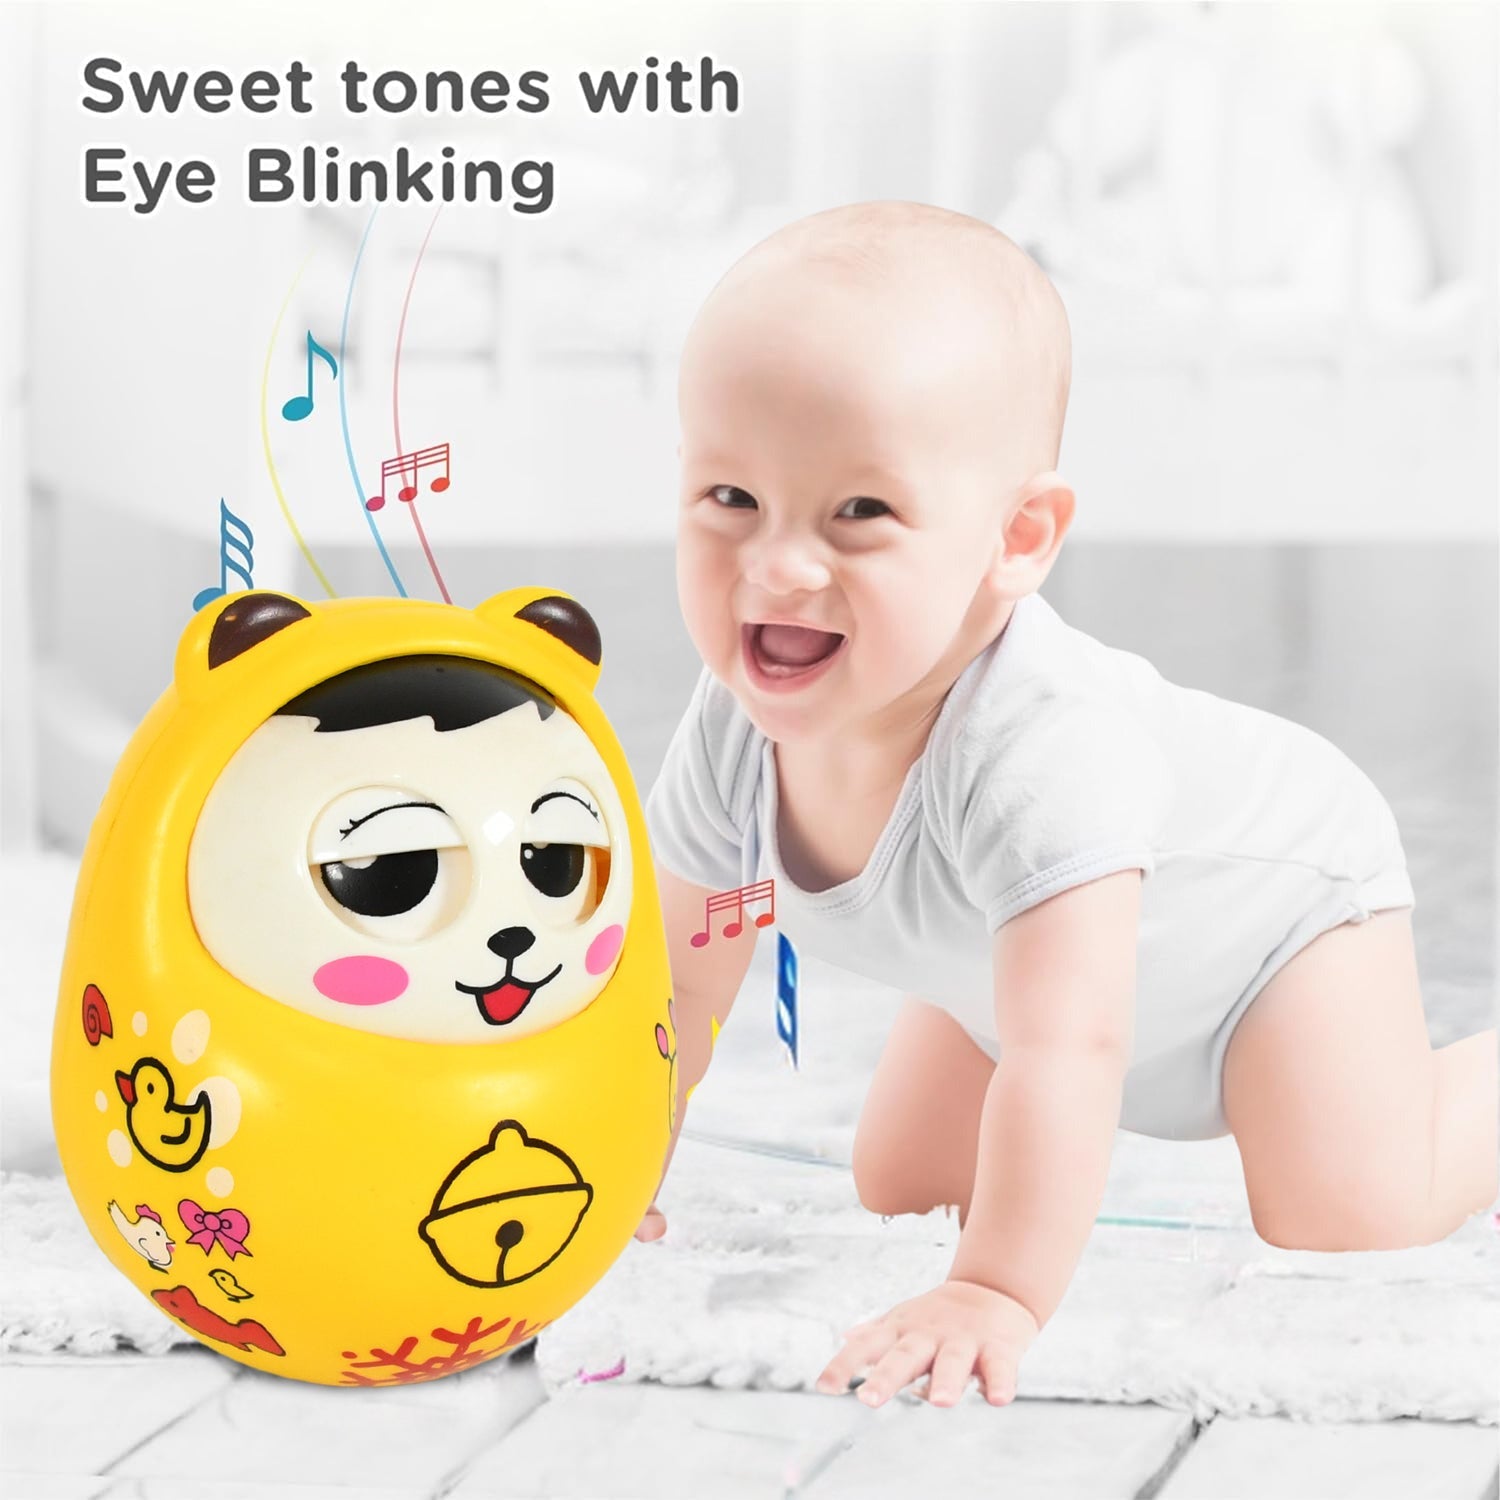 1935 Musical Roly Poly Toys for Baby | Push and Shake Wobbling Toy with Music | Tumbler Doll Toy for Babies | Sound Balancing Doll Toys for Baby Boys, Girls 8+ Months Multicolor (1 Pc)